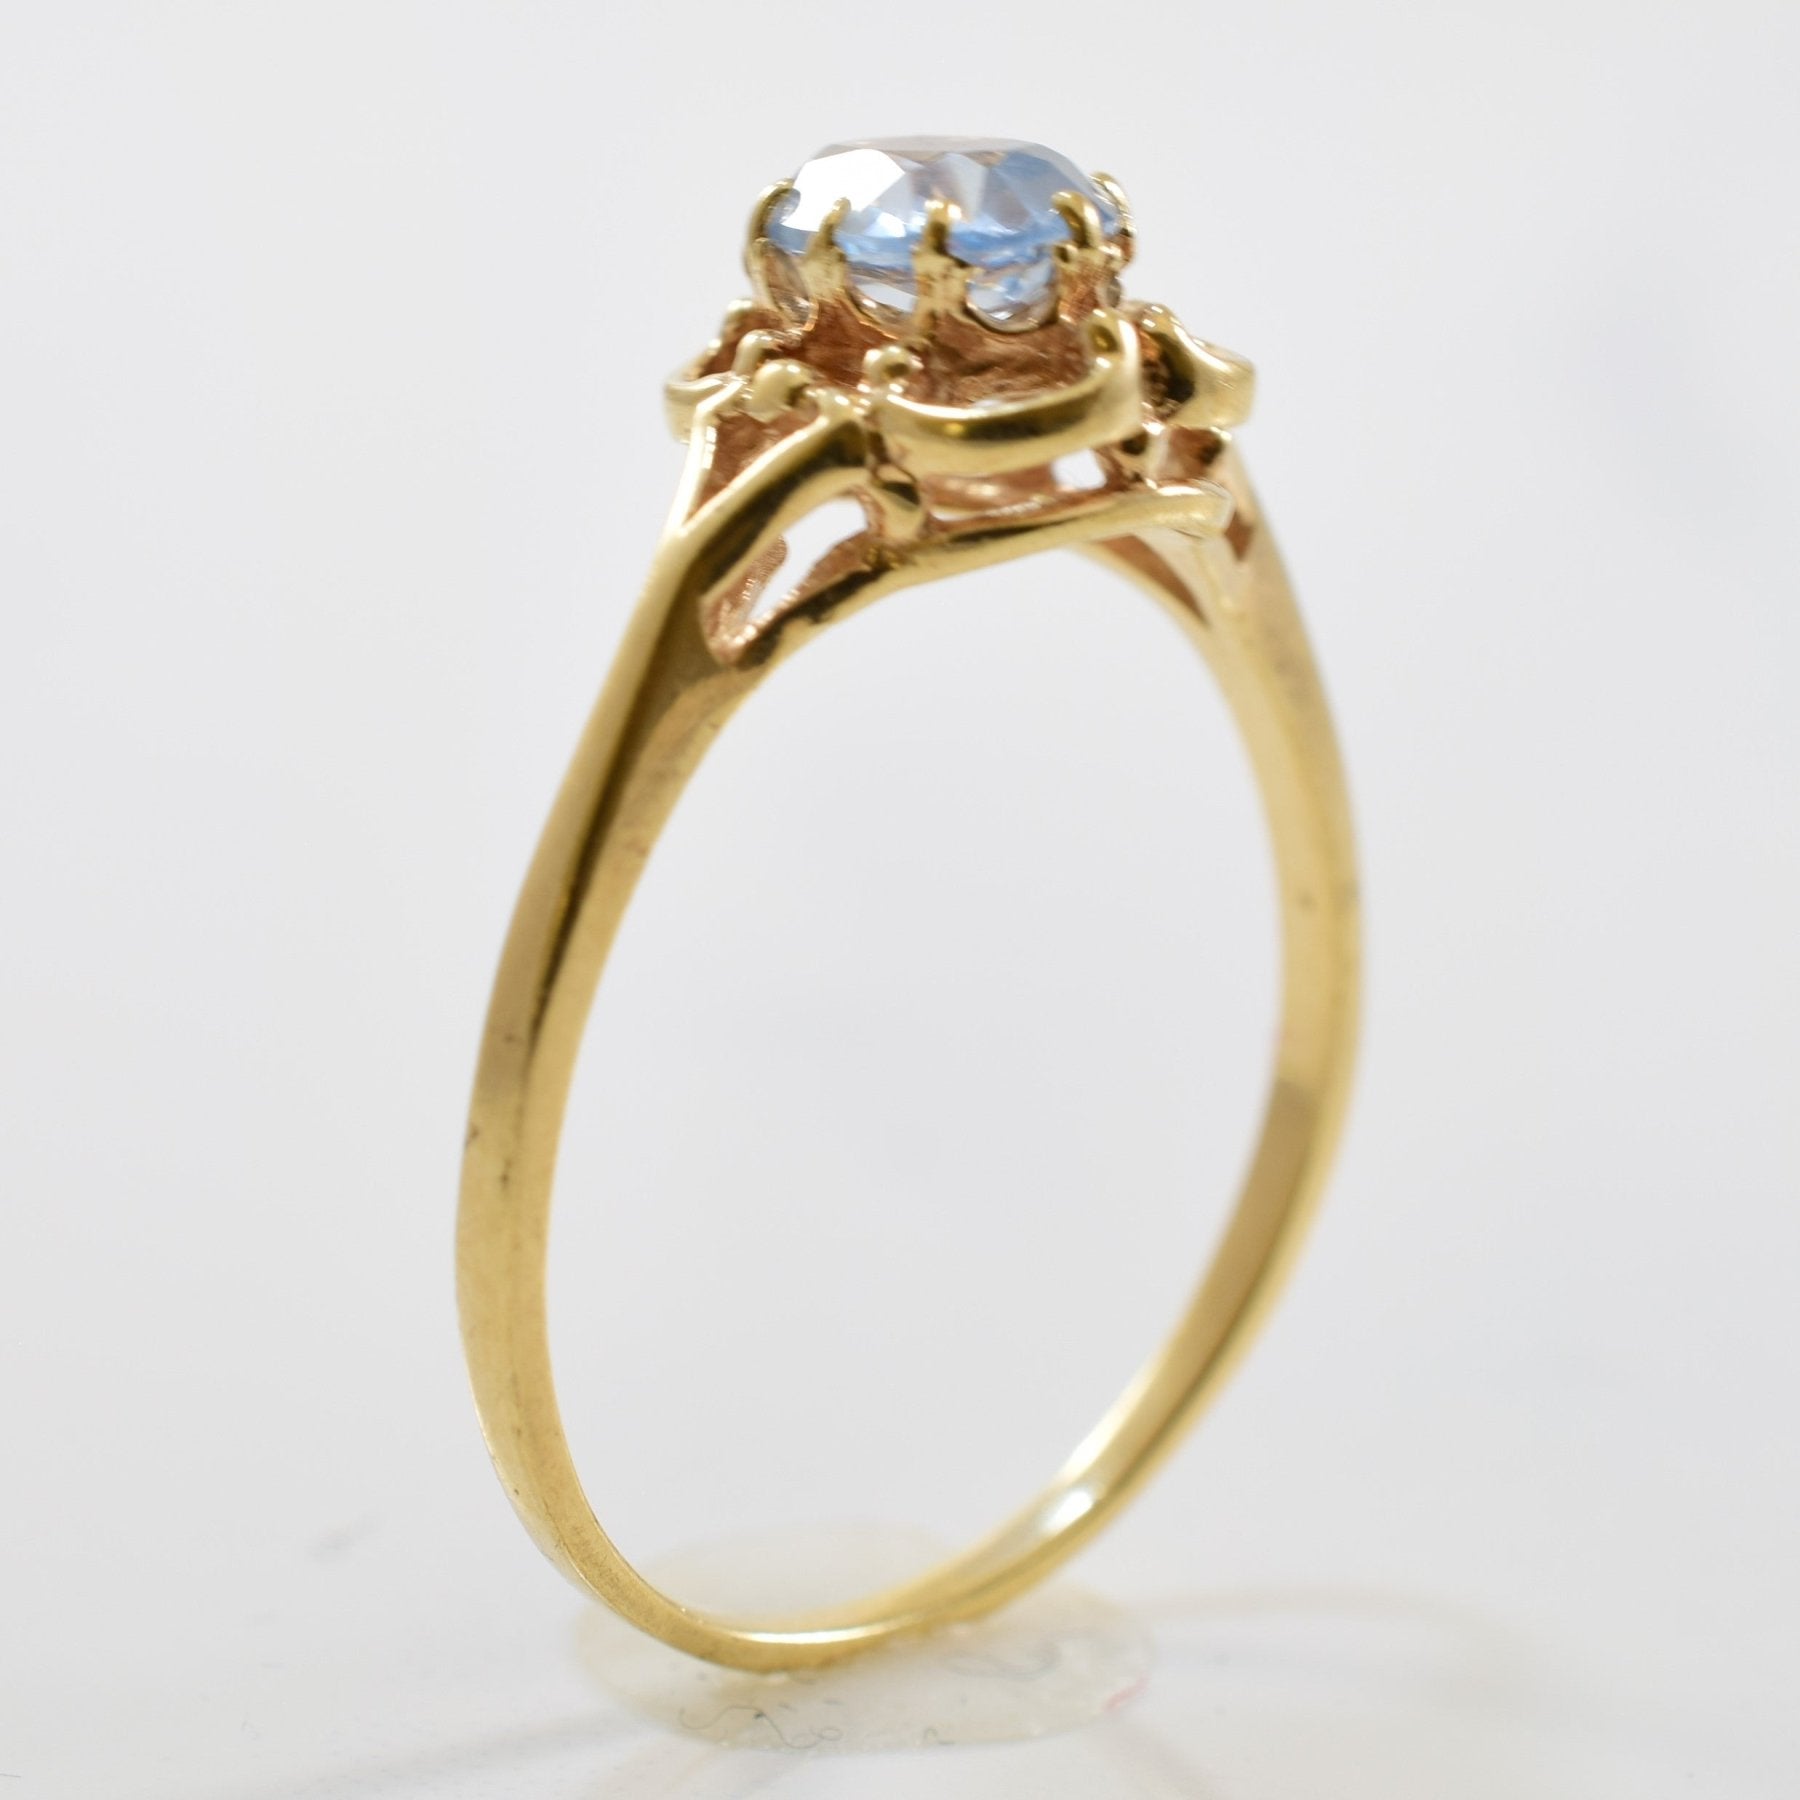 10k Synthetic Spinel Gold Ring | 0.81 ct | Sz 9 - 100 Ways